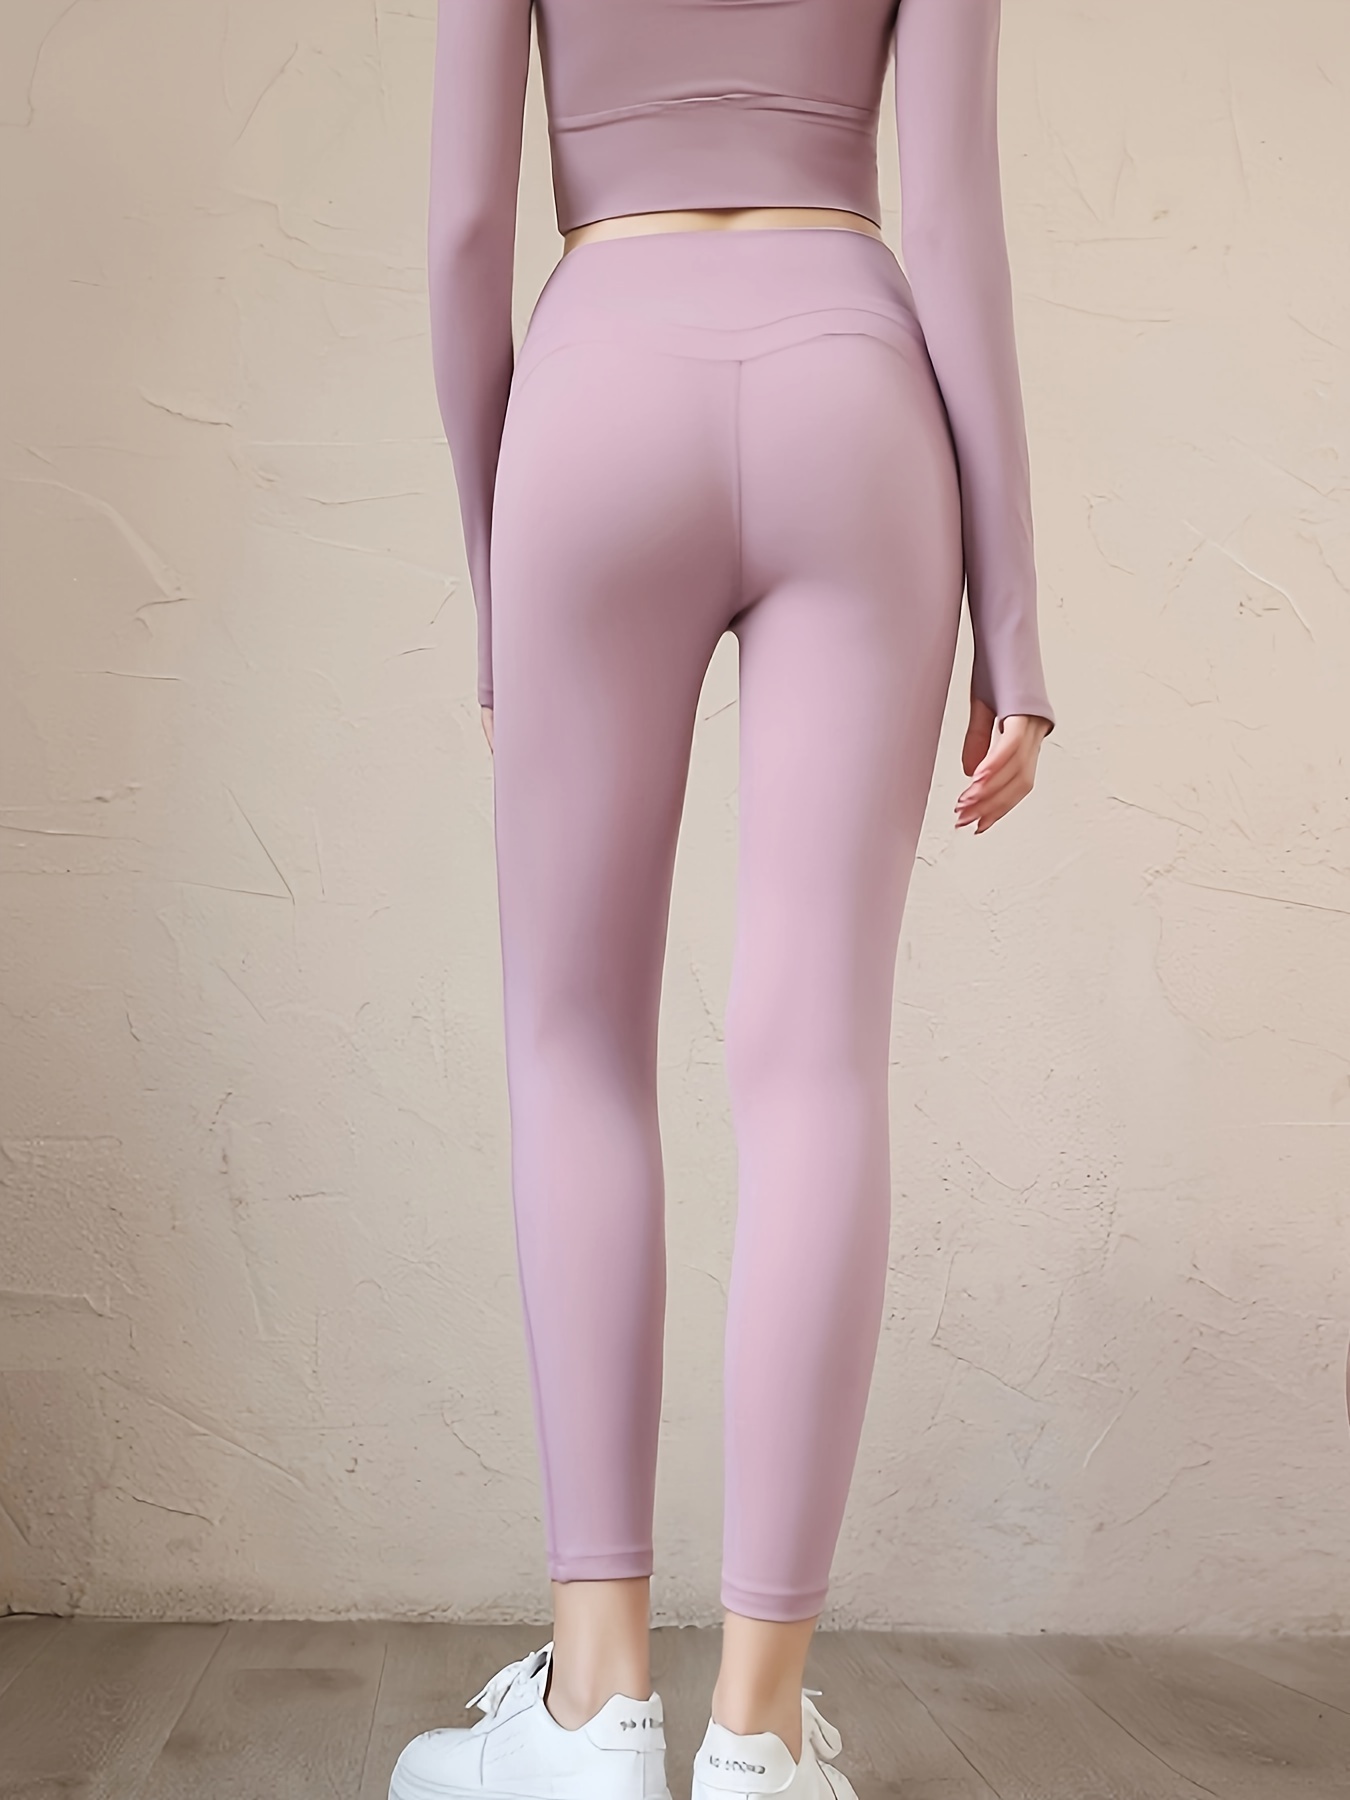 New Peach Butt Yoga Pants High Waisted, Nude Exercise Tights